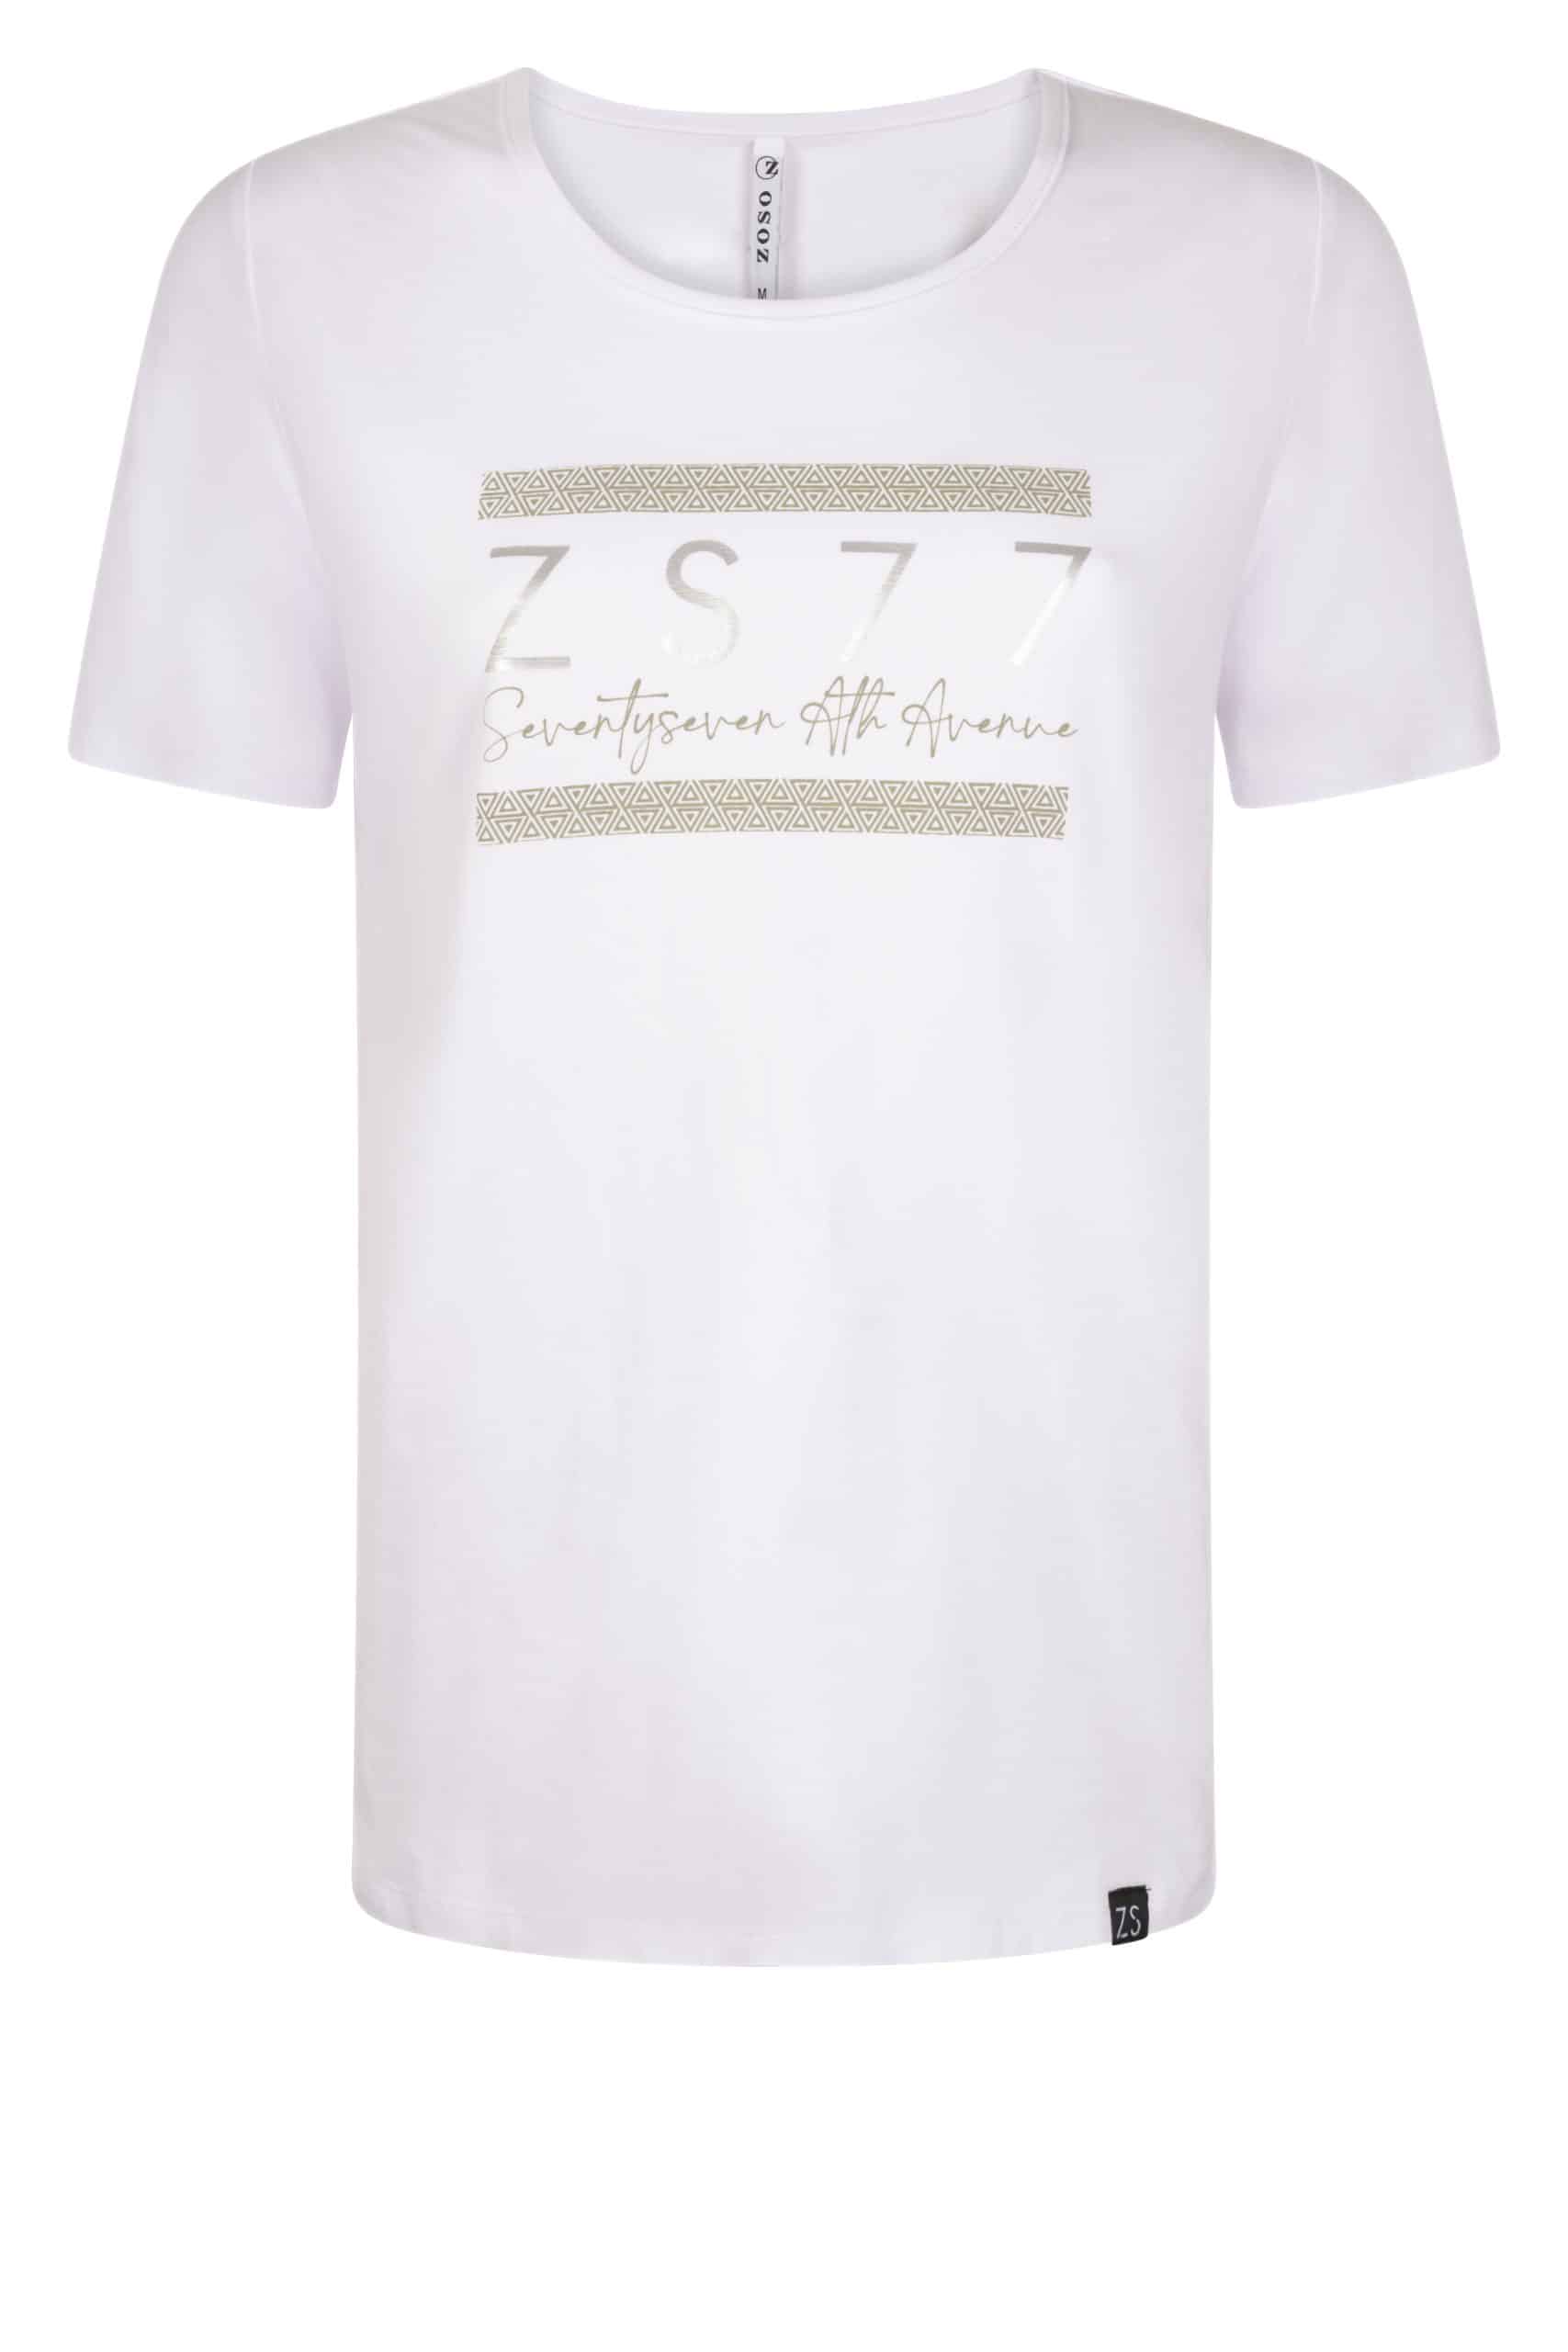 Zoso 222 Kylie T-Shirt With Print White/Army